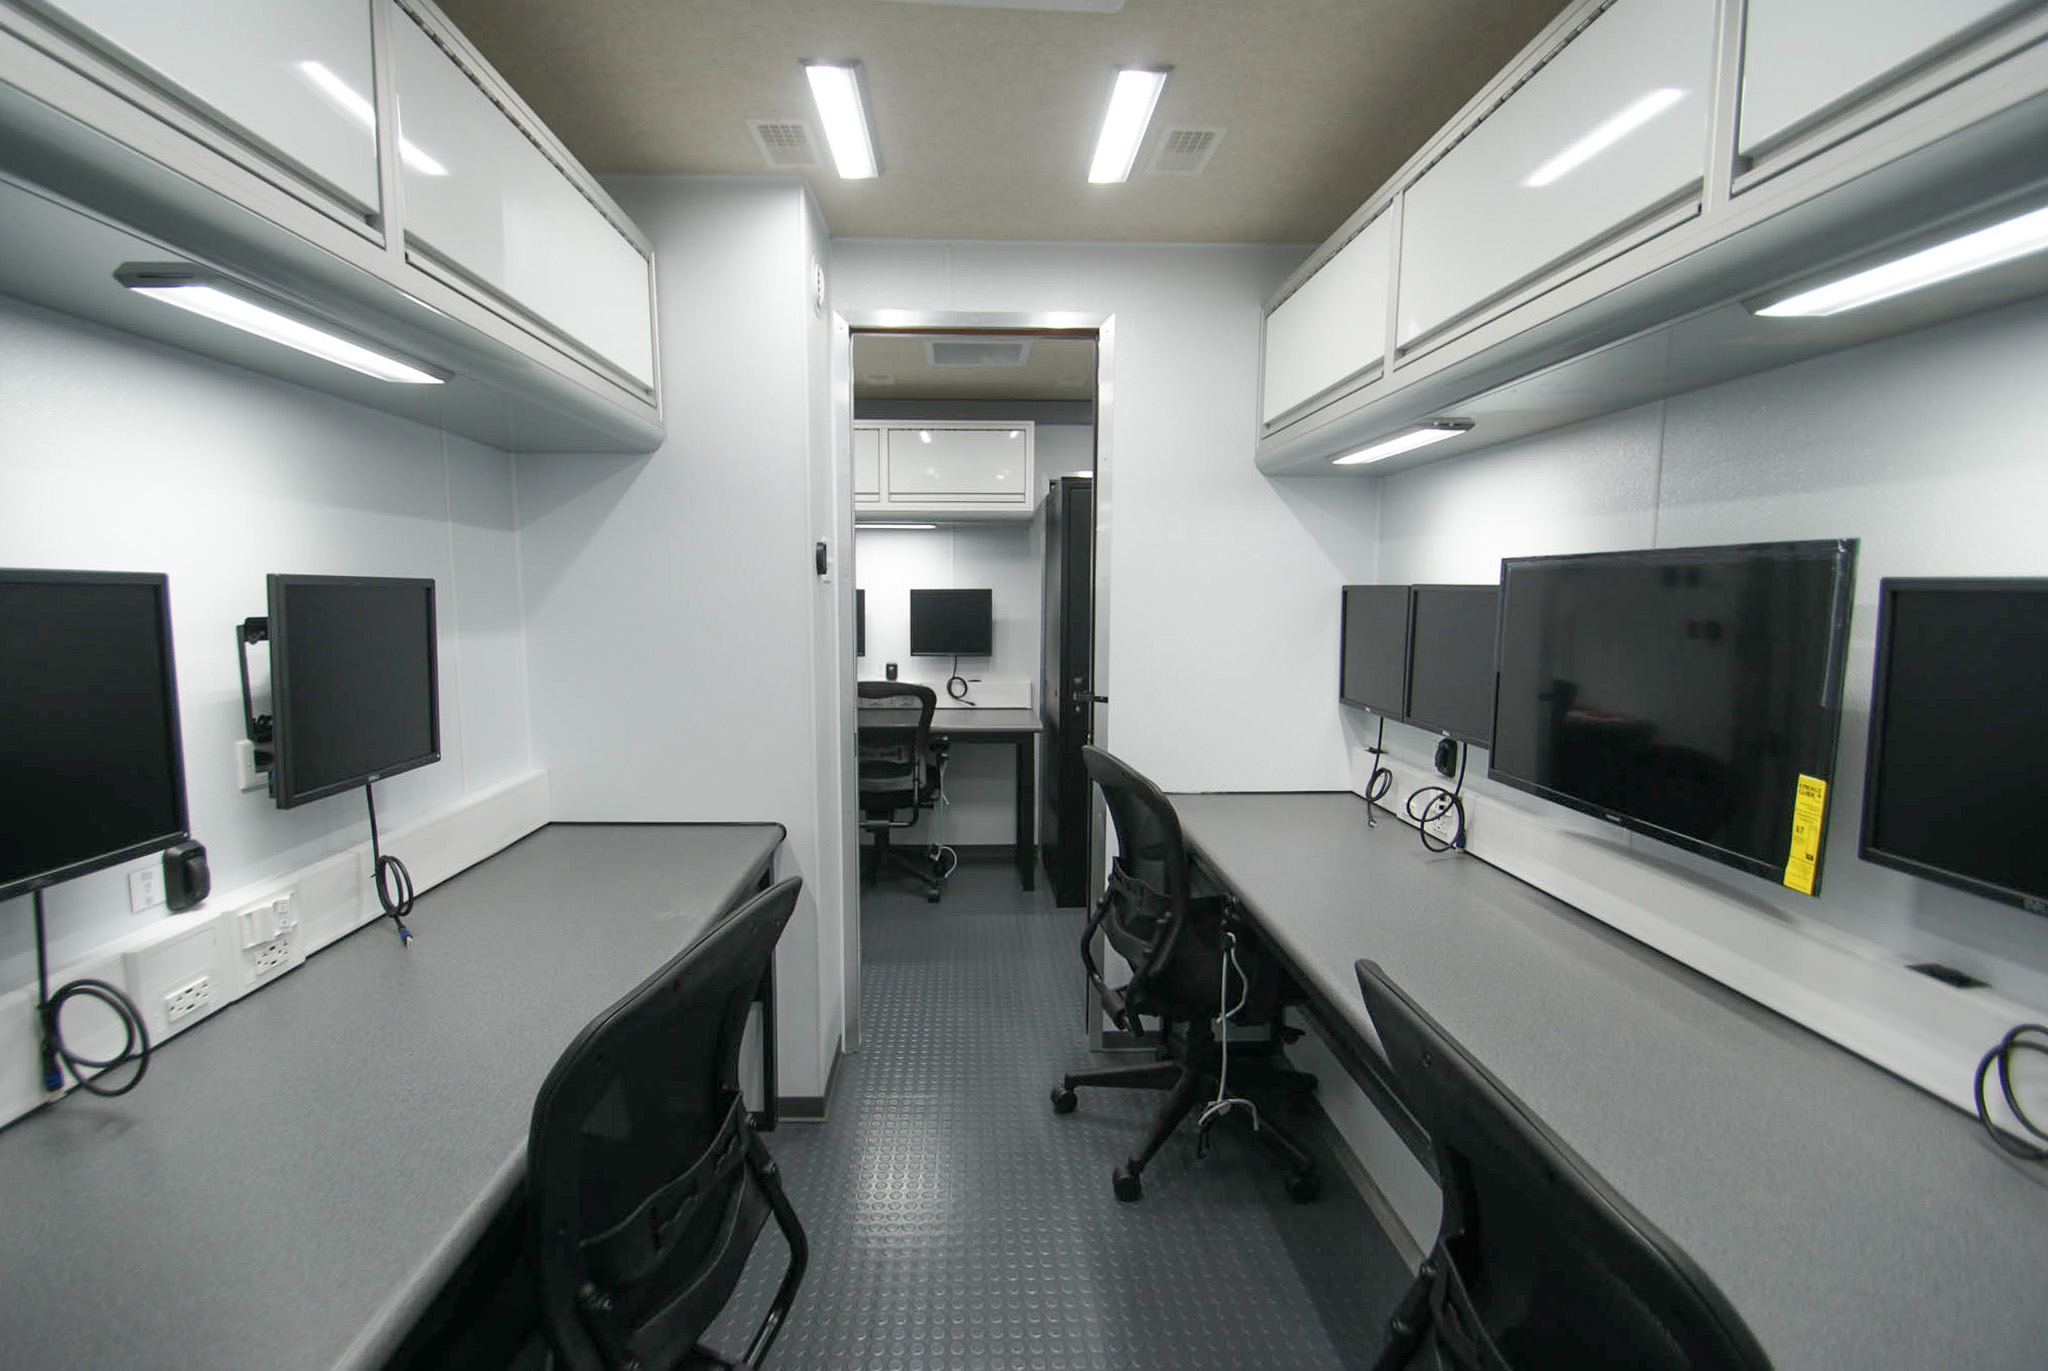 A back-to-front view inside the unit for Delhi, NY.